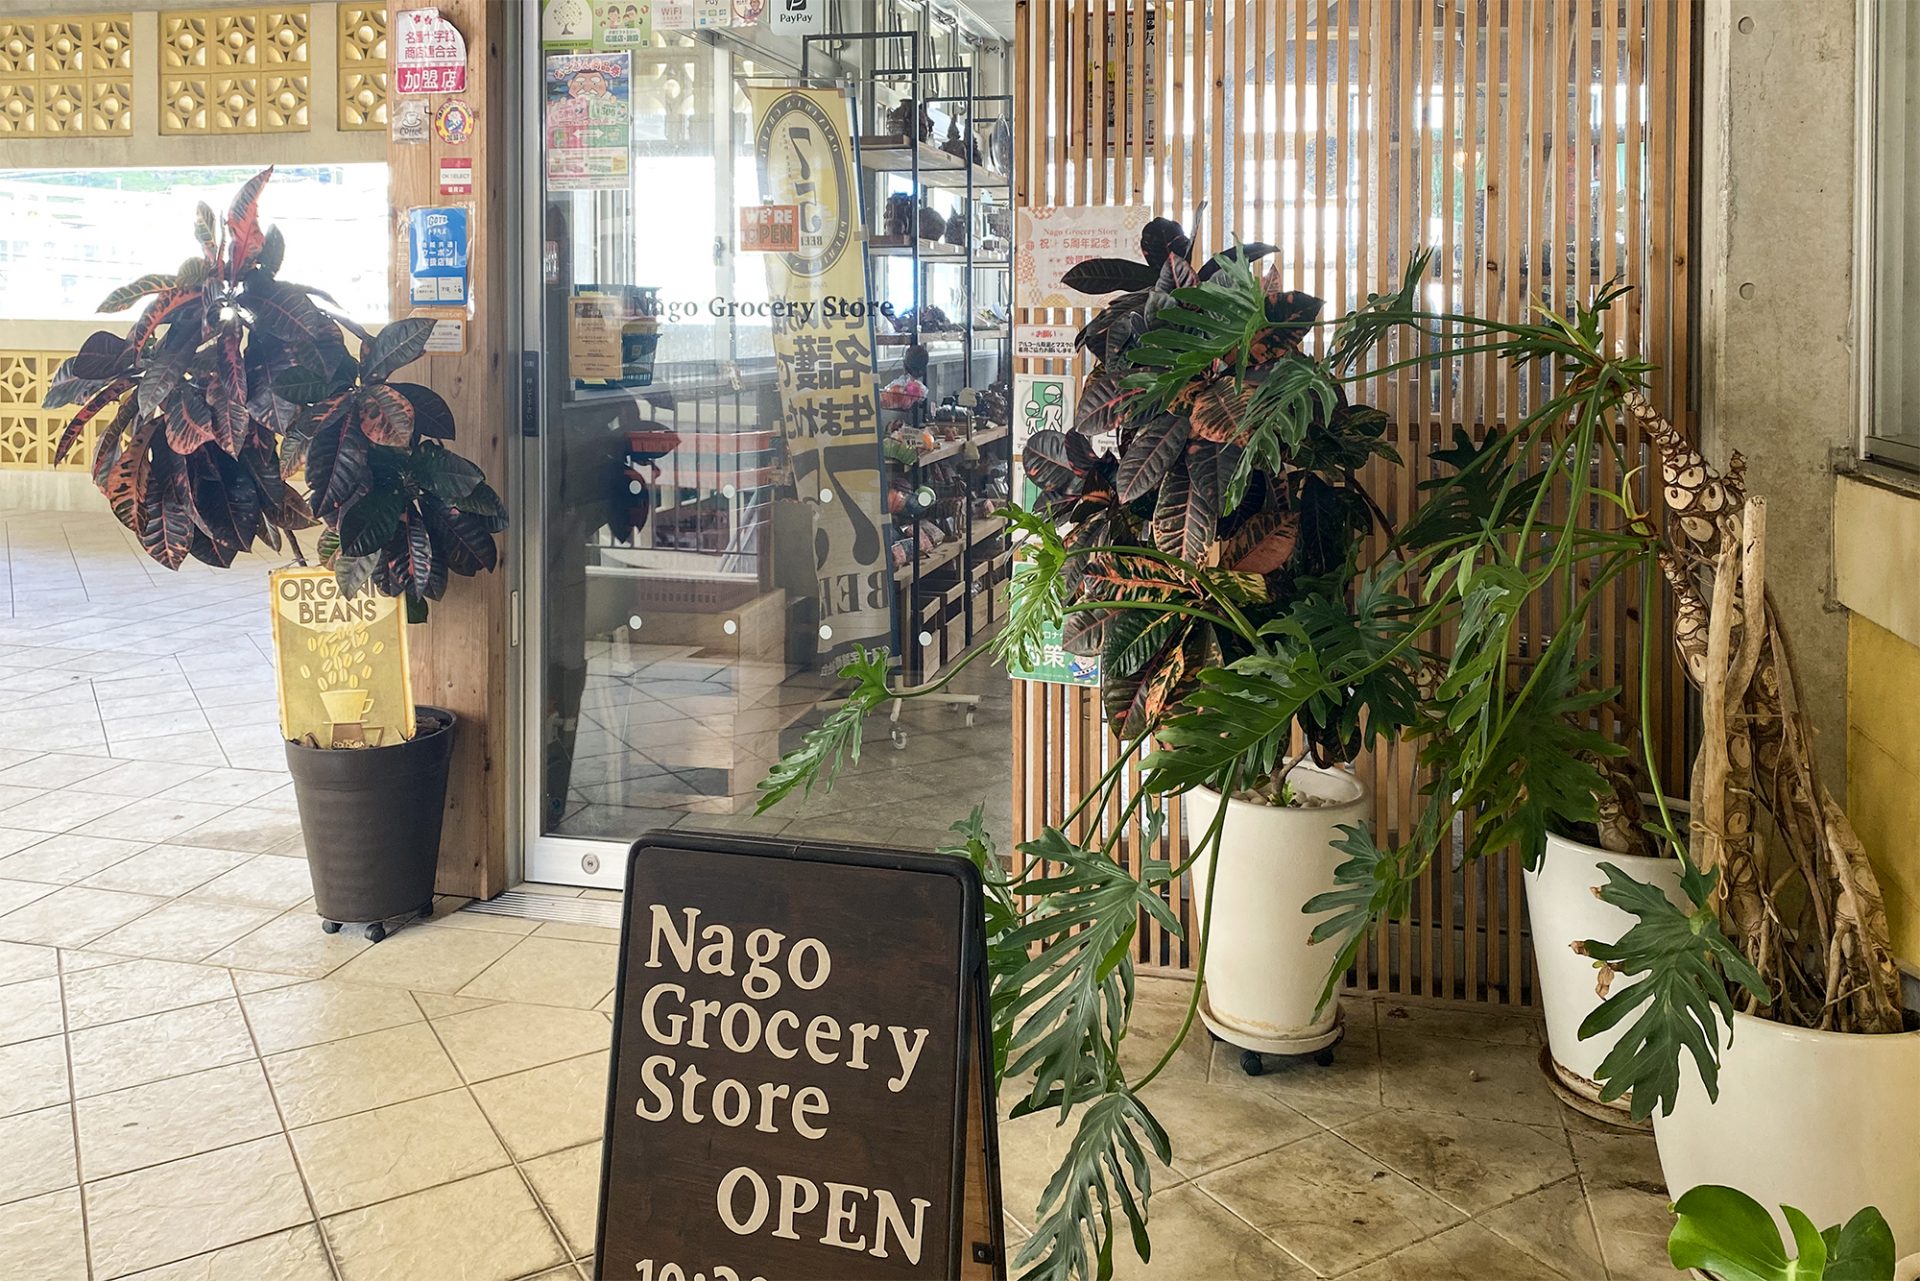 Nago Grocery Store